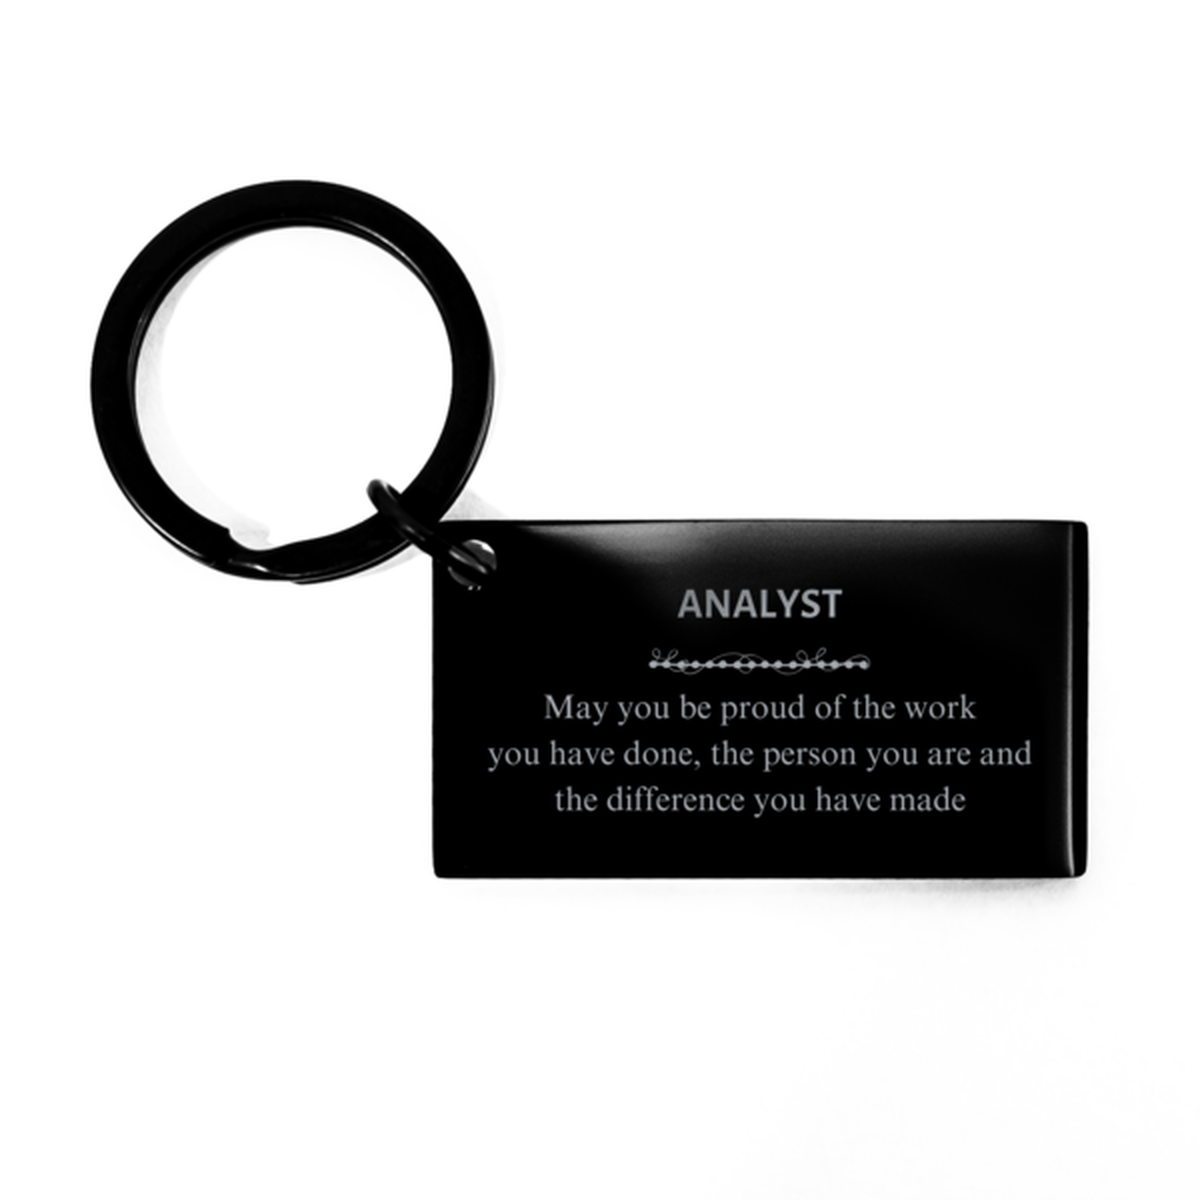 Civil Engineer May you be proud of the work you have done, Retirement Analyst Keychain for Colleague Appreciation Gifts Amazing for Analyst